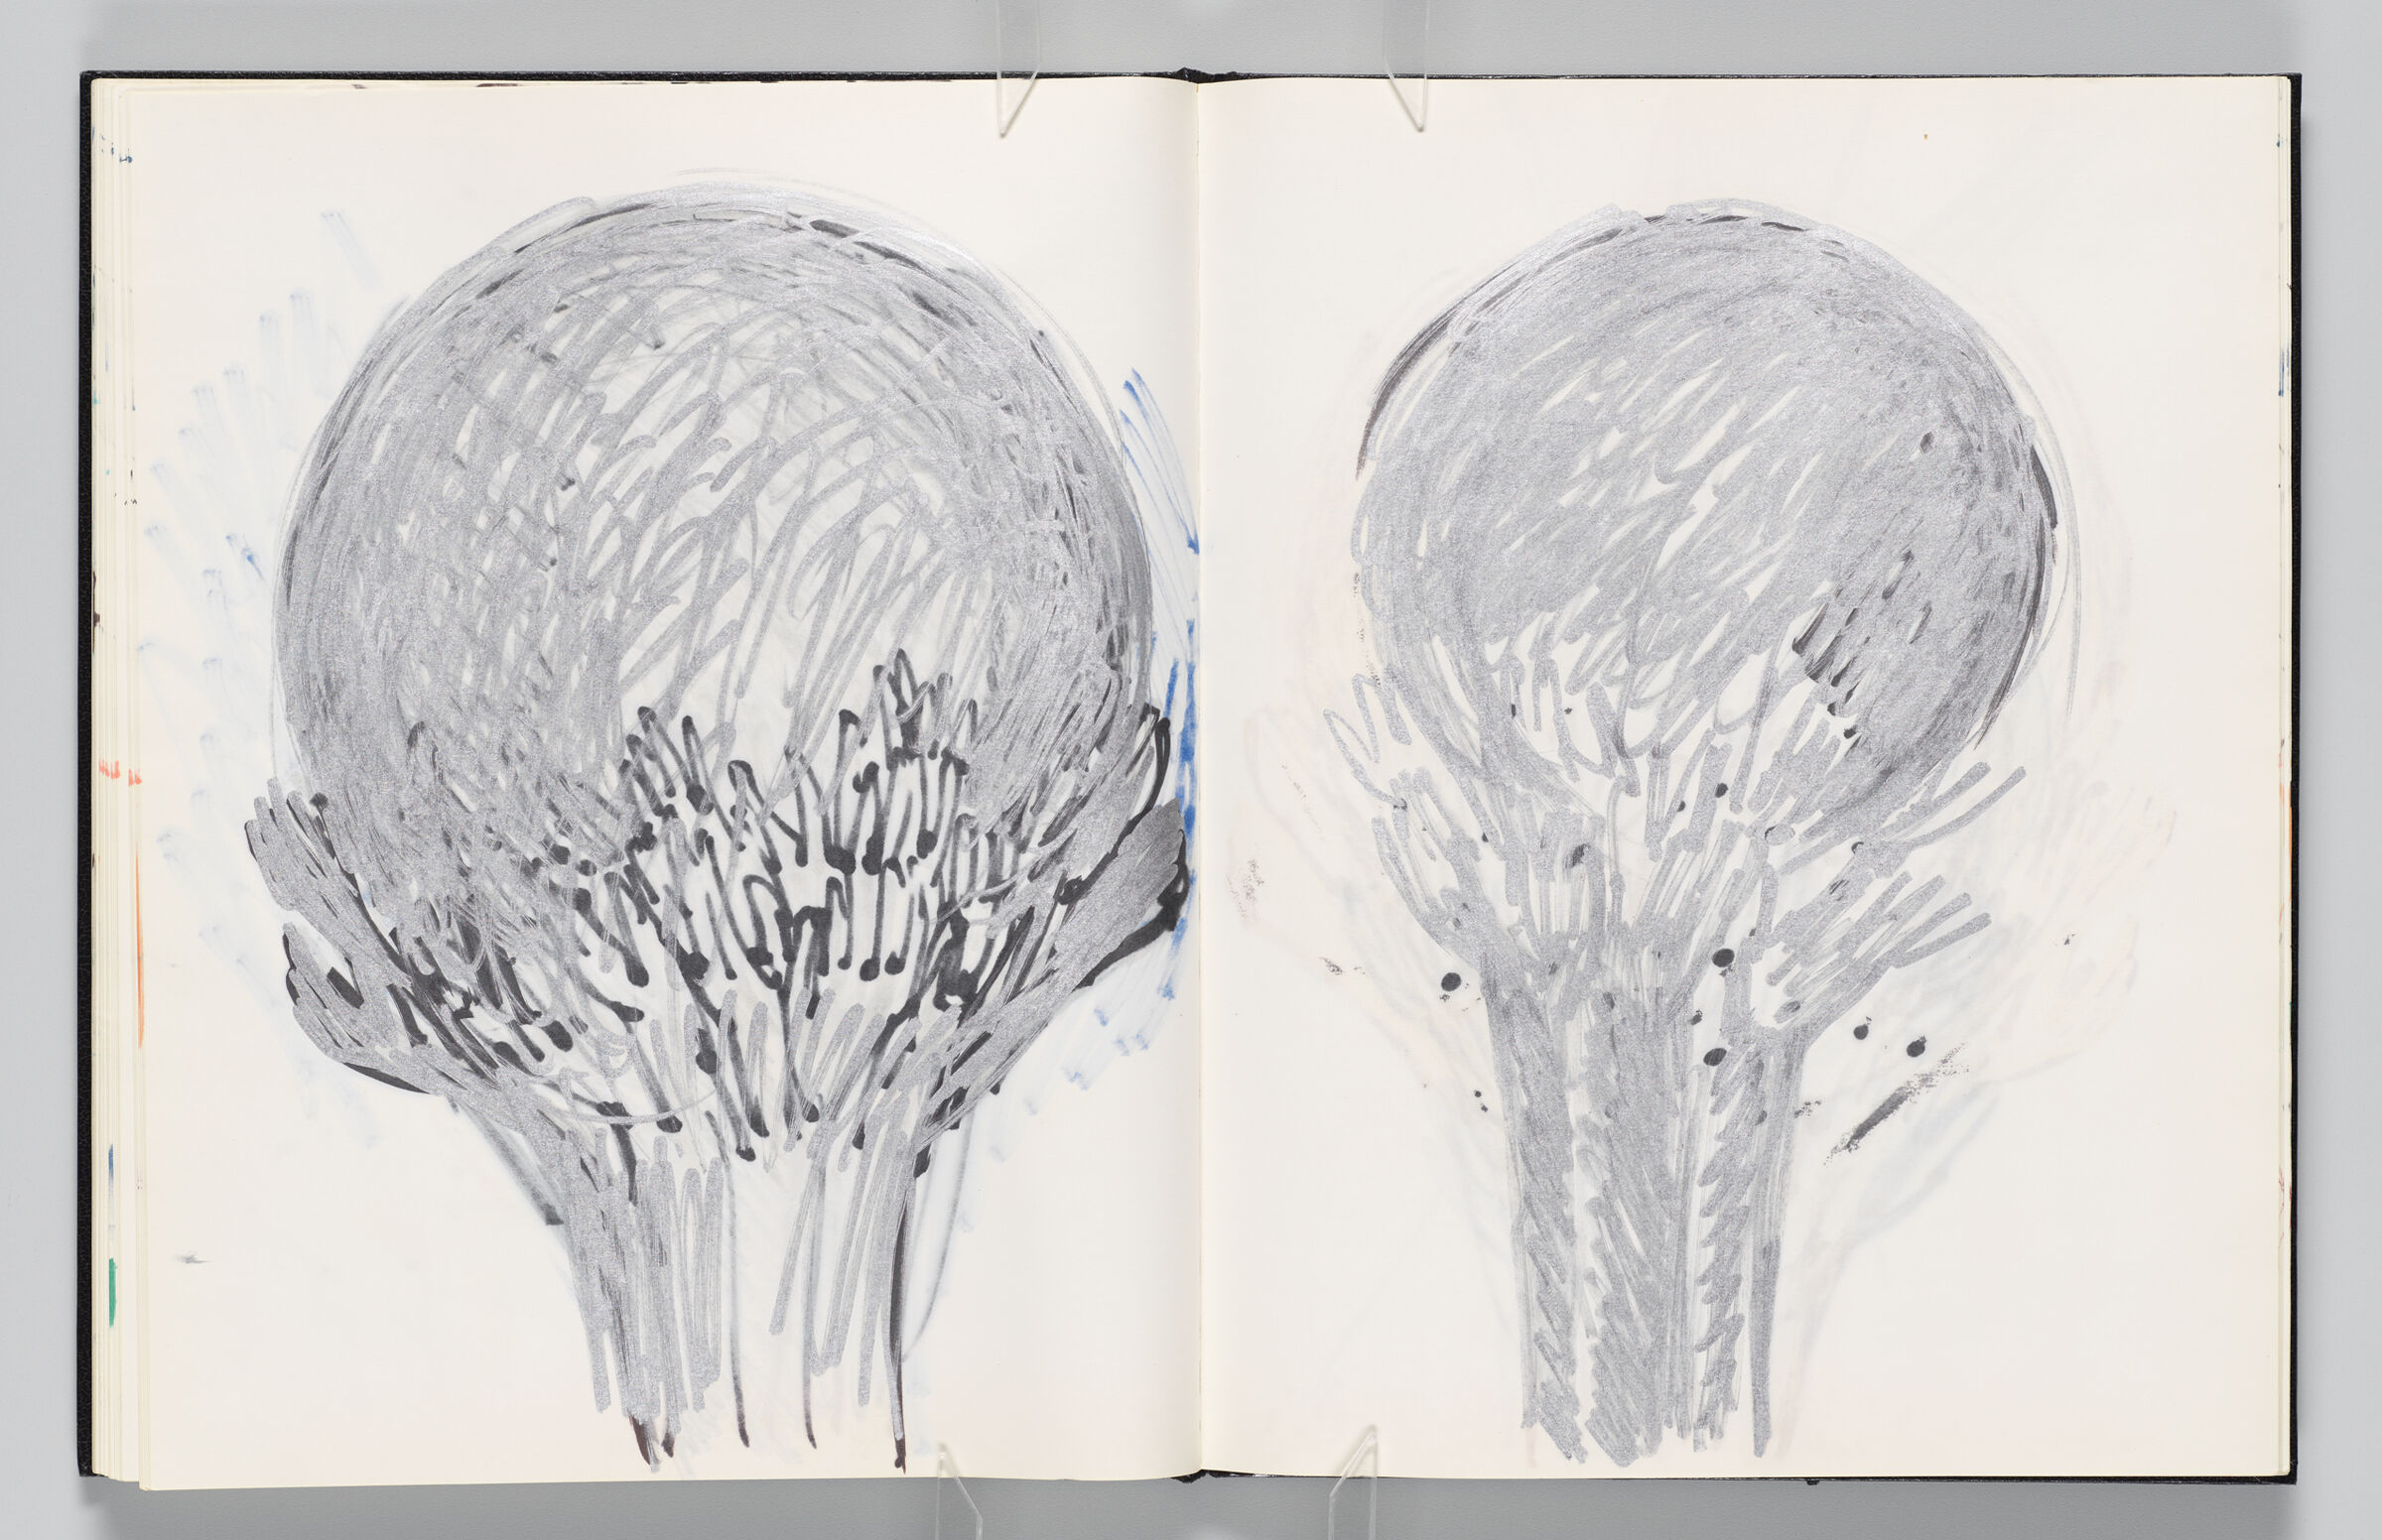 Untitled (Hands Holding Globe And Bleed-Through Of Previous Page, Left Page); Untitled (Hands Holding Globe, Right Page)